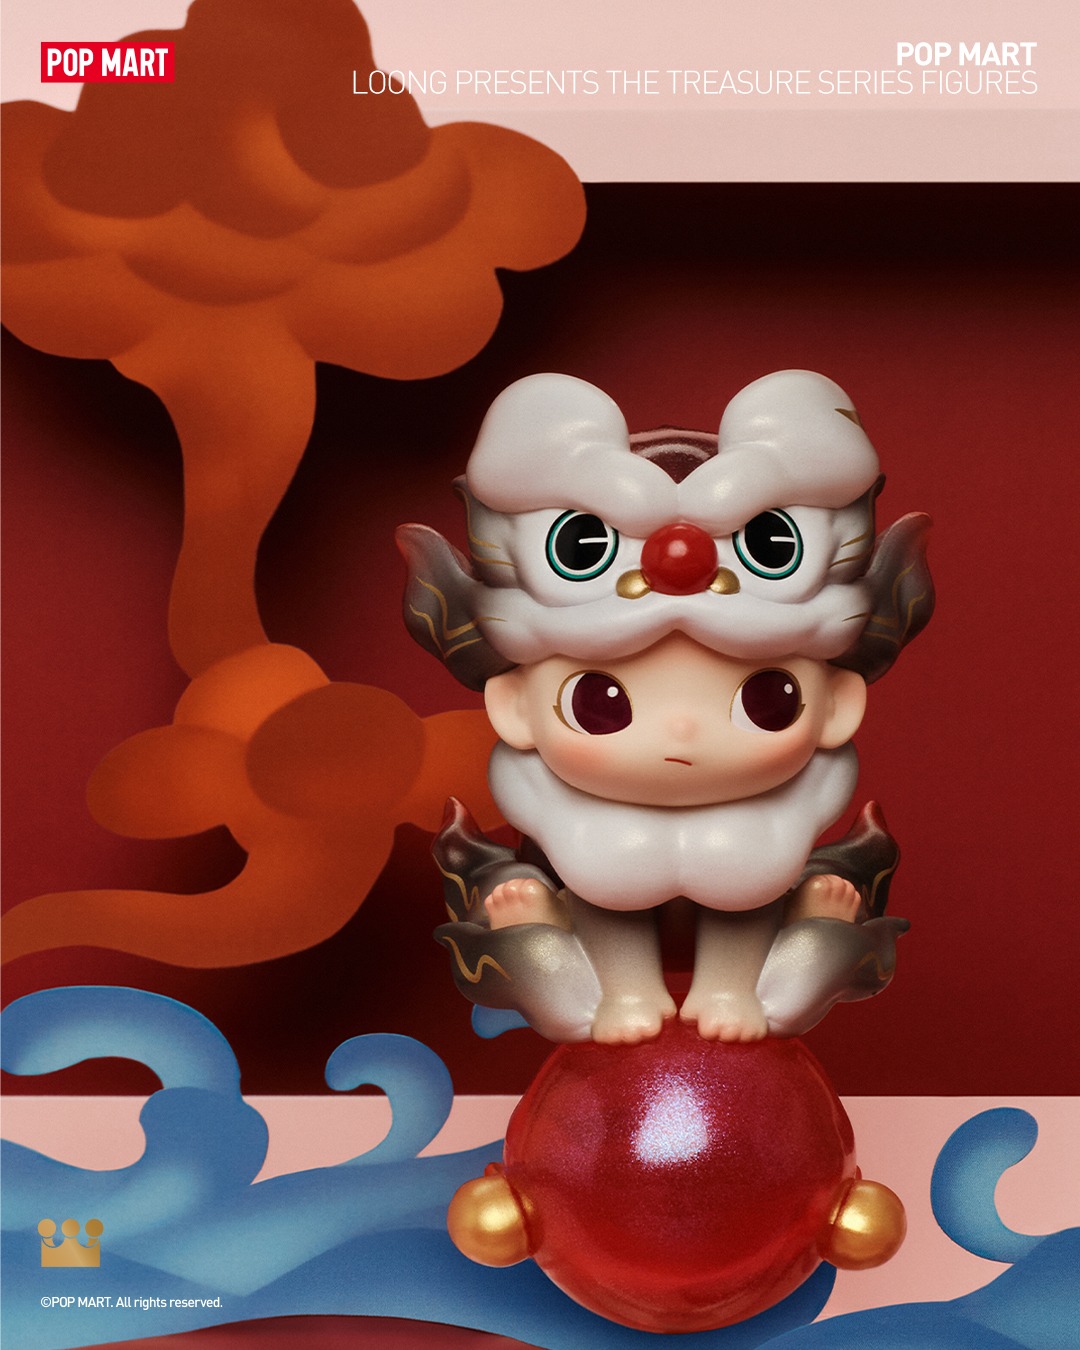 POP MART x Loong Presents the Treasure Blind Box Series - The Toy Chronicle